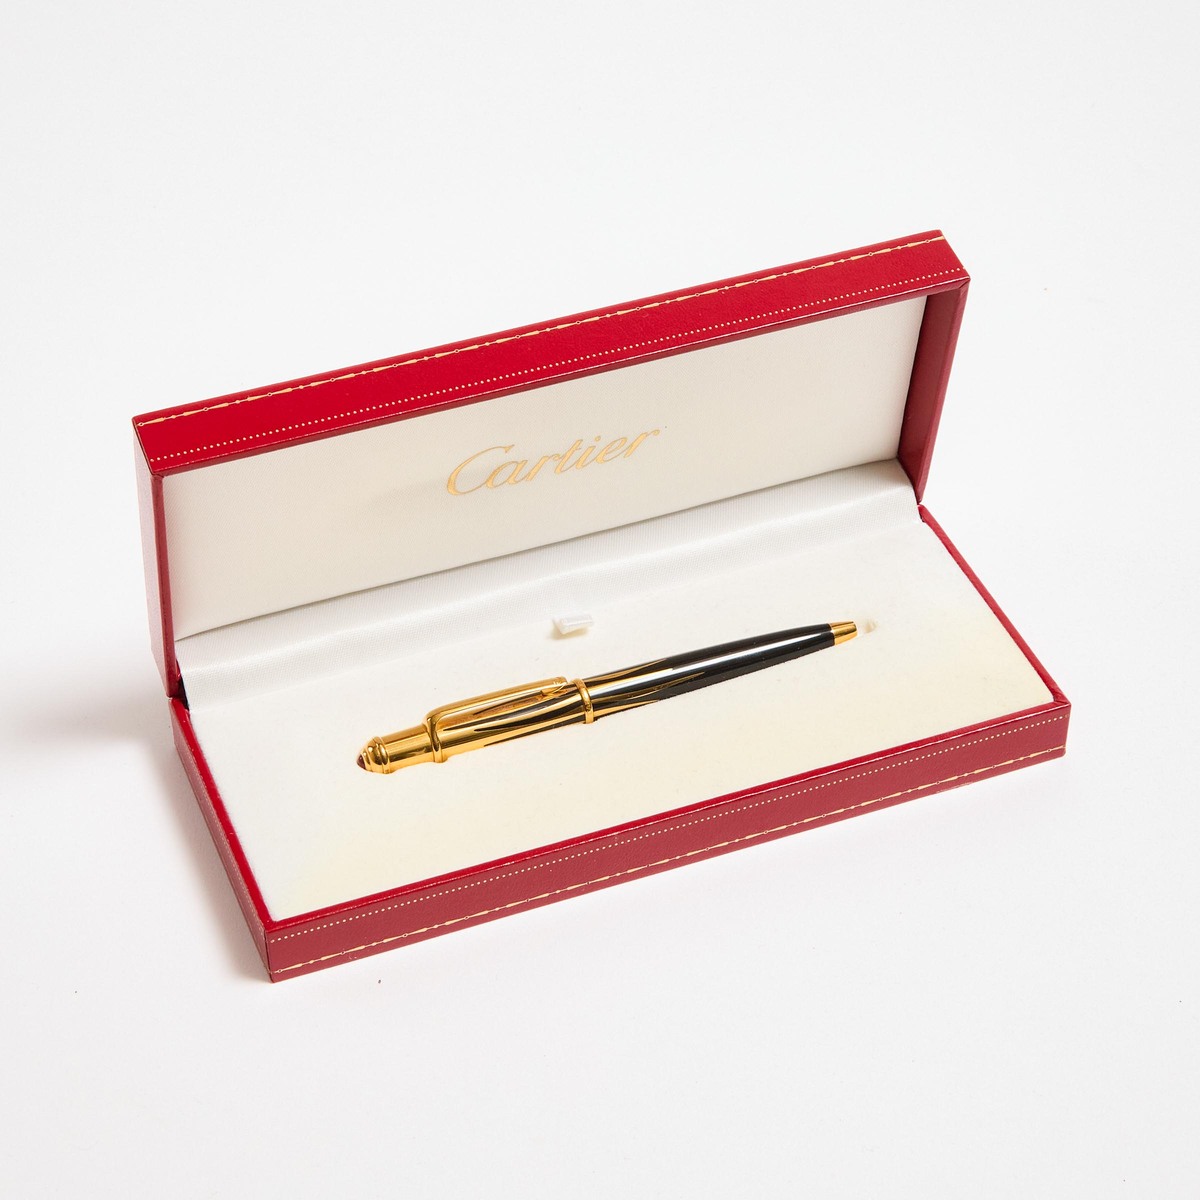 Cartier Mini Diablo Ballpoint Pen, #074456; in a gold-plated and black resin body, topped with a syn